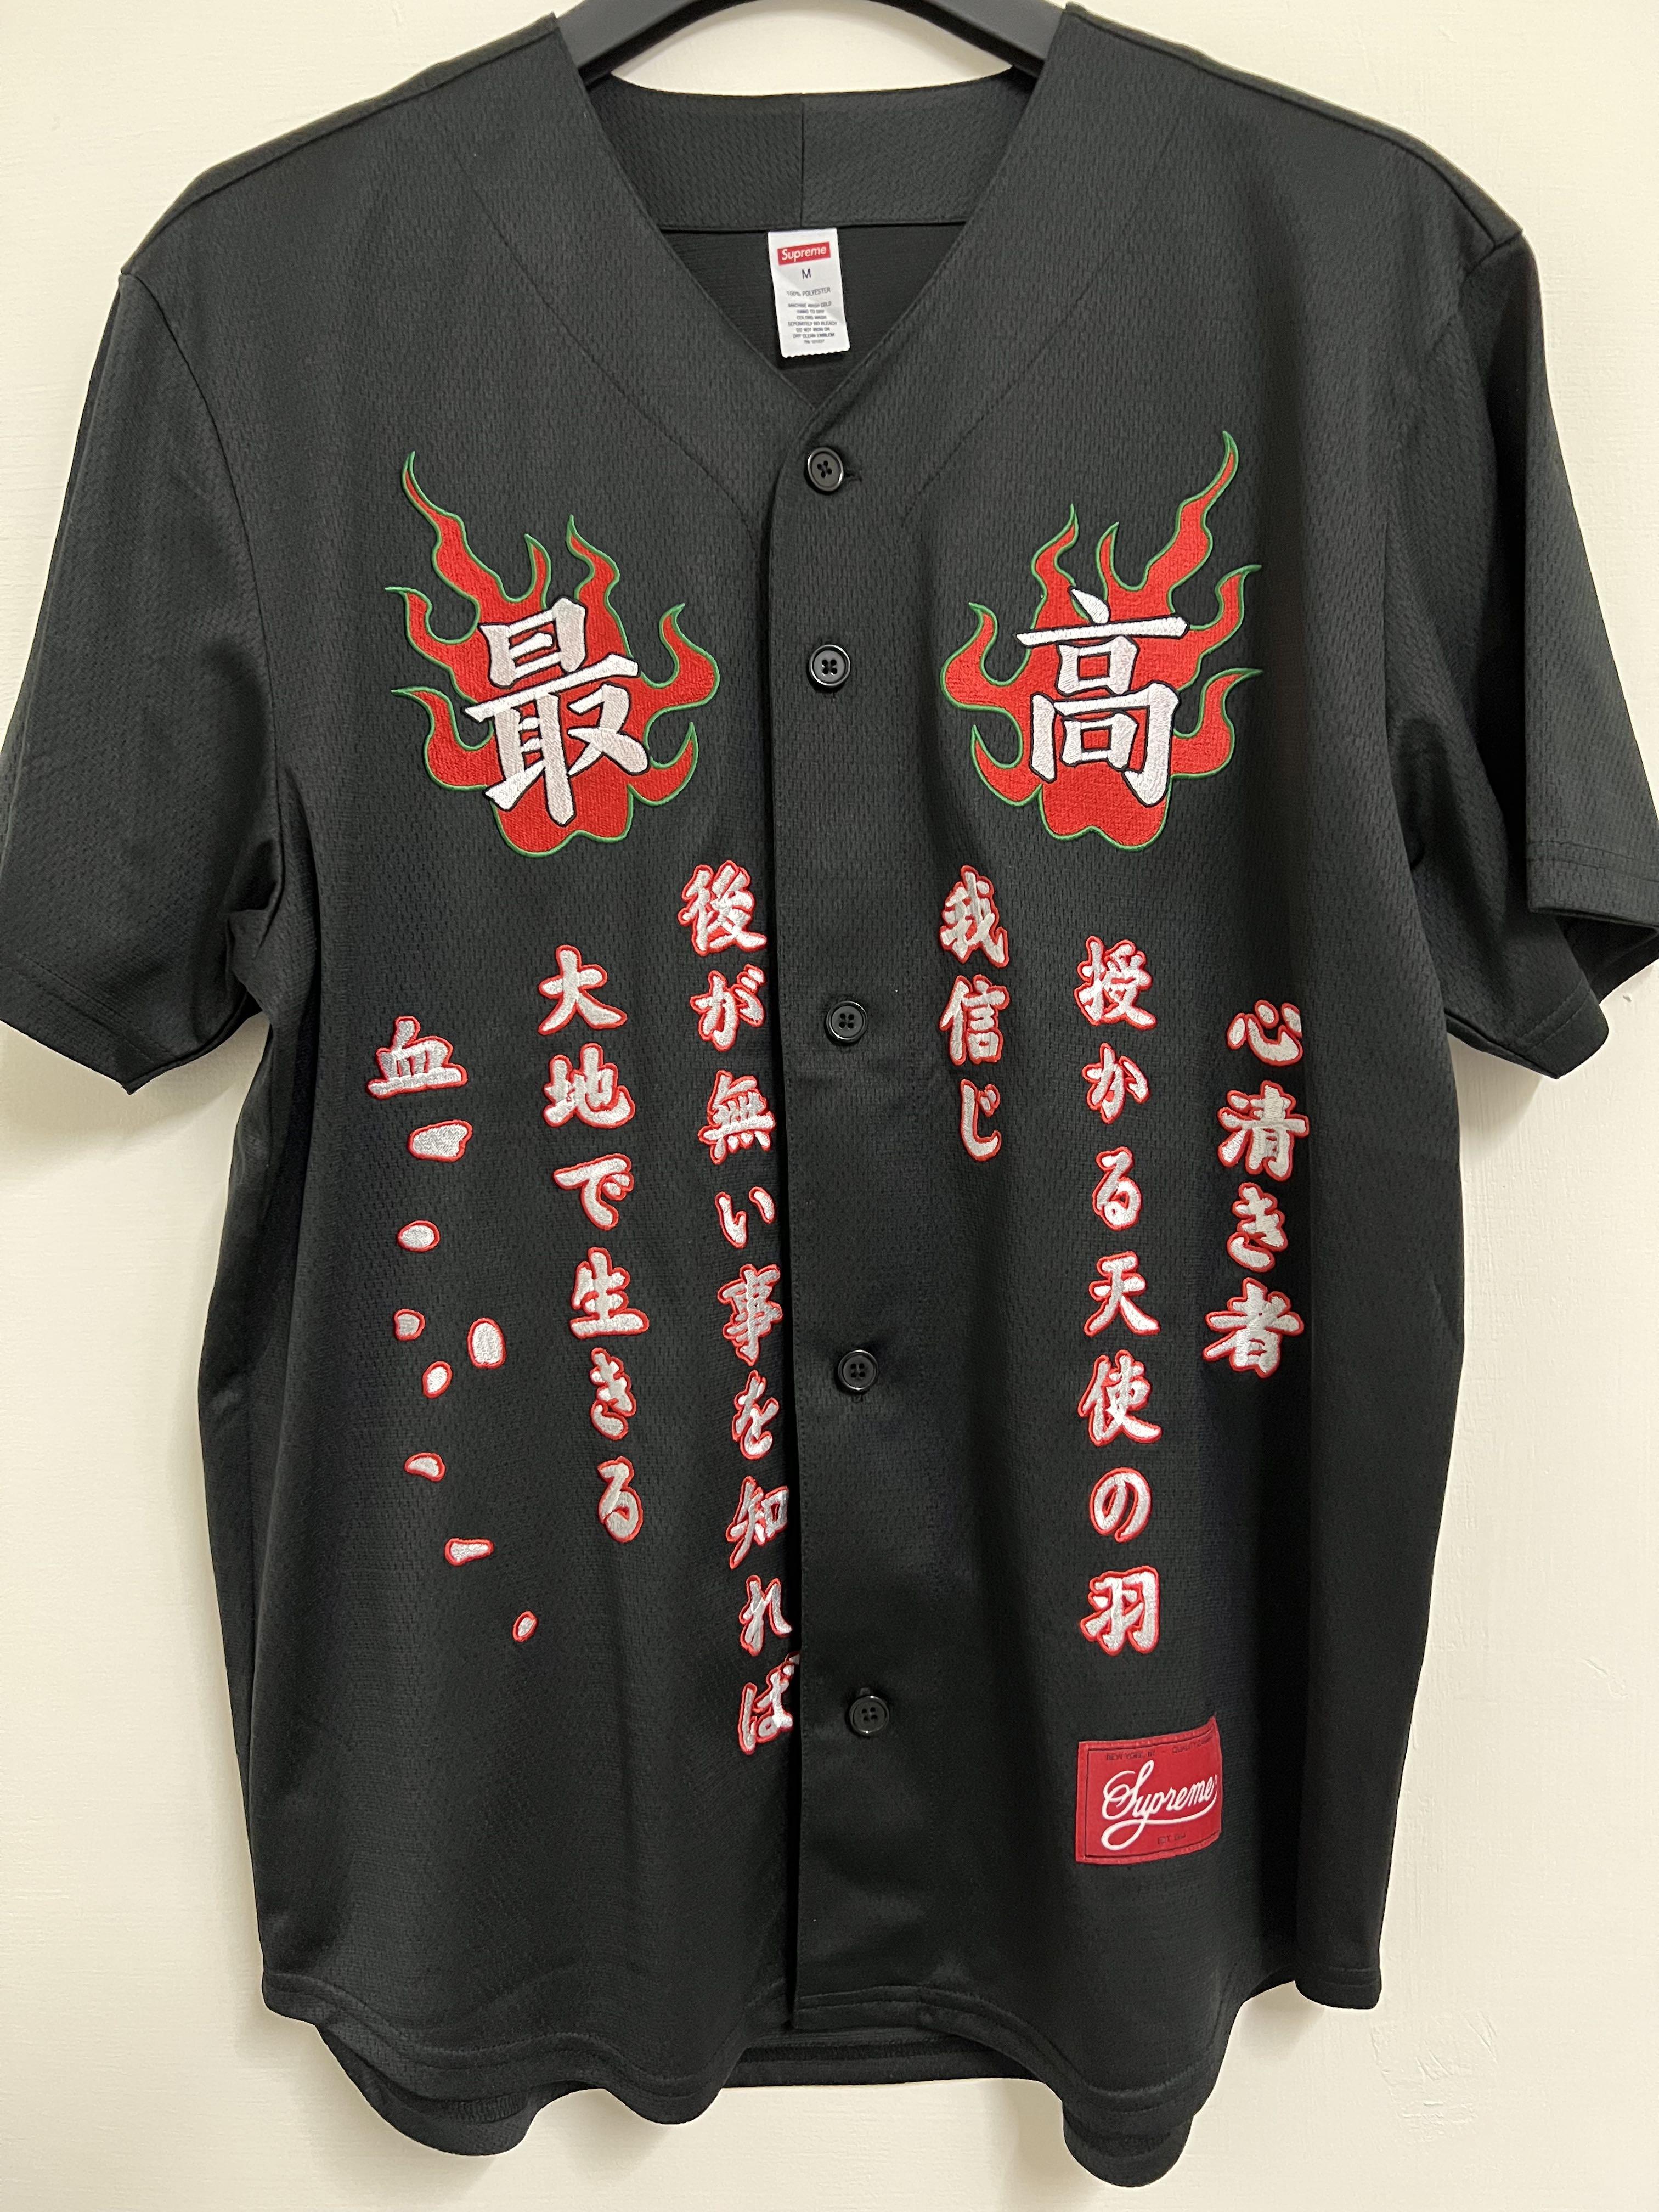 tiger embroidered baseball jersey